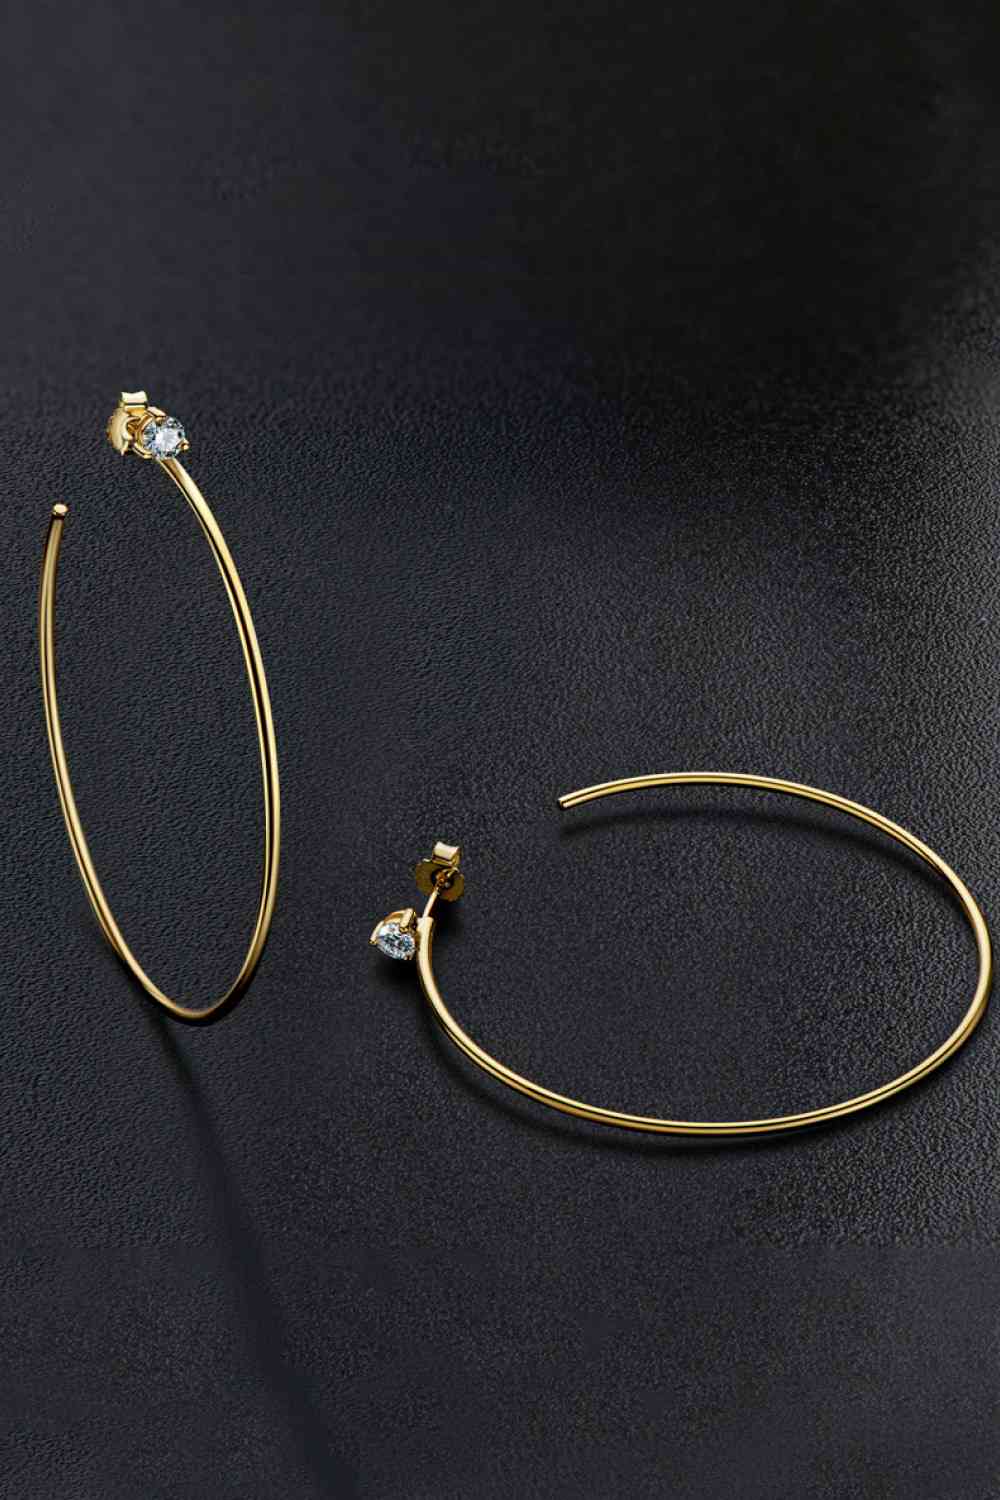 a pair of gold hoop earrings on a black surface